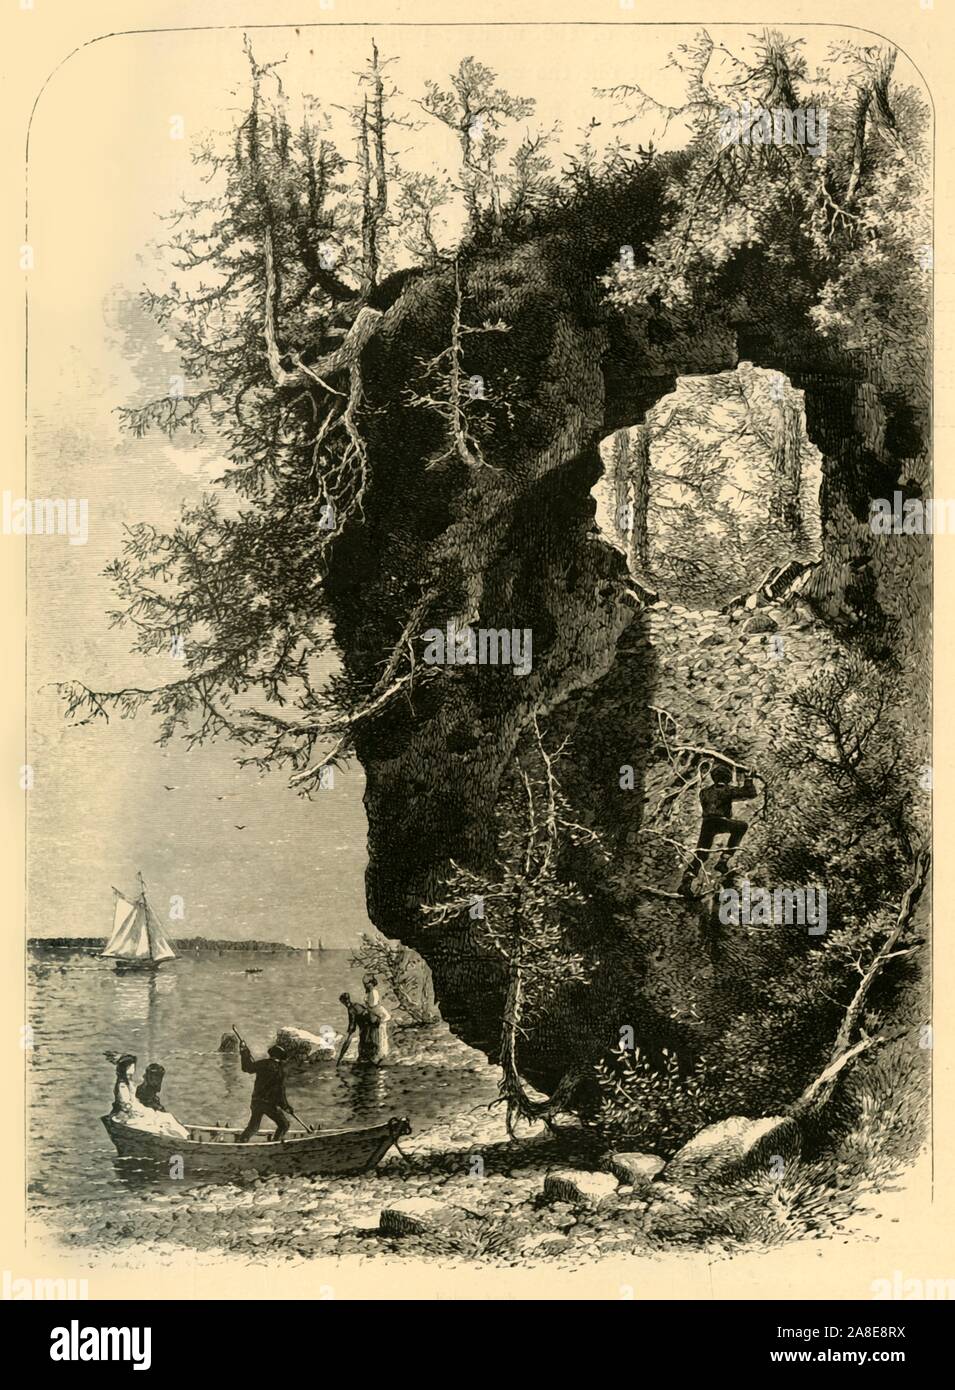 'Fairy Arch', 1872. Tourists visit an unusual rock formation on Mackinac Island, Lake Huron, Michigan, USA. From &quot;Picturesque America; or, The Land We Live In, A Delineation by Pen and Pencil of the Mountains, Rivers, Lakes...with Illustrations on Steel and Wood by Eminent American Artists&quot; Vol. I, edited by William Cullen Bryant. [D. Appleton and Company, New York, 1872] Stock Photo